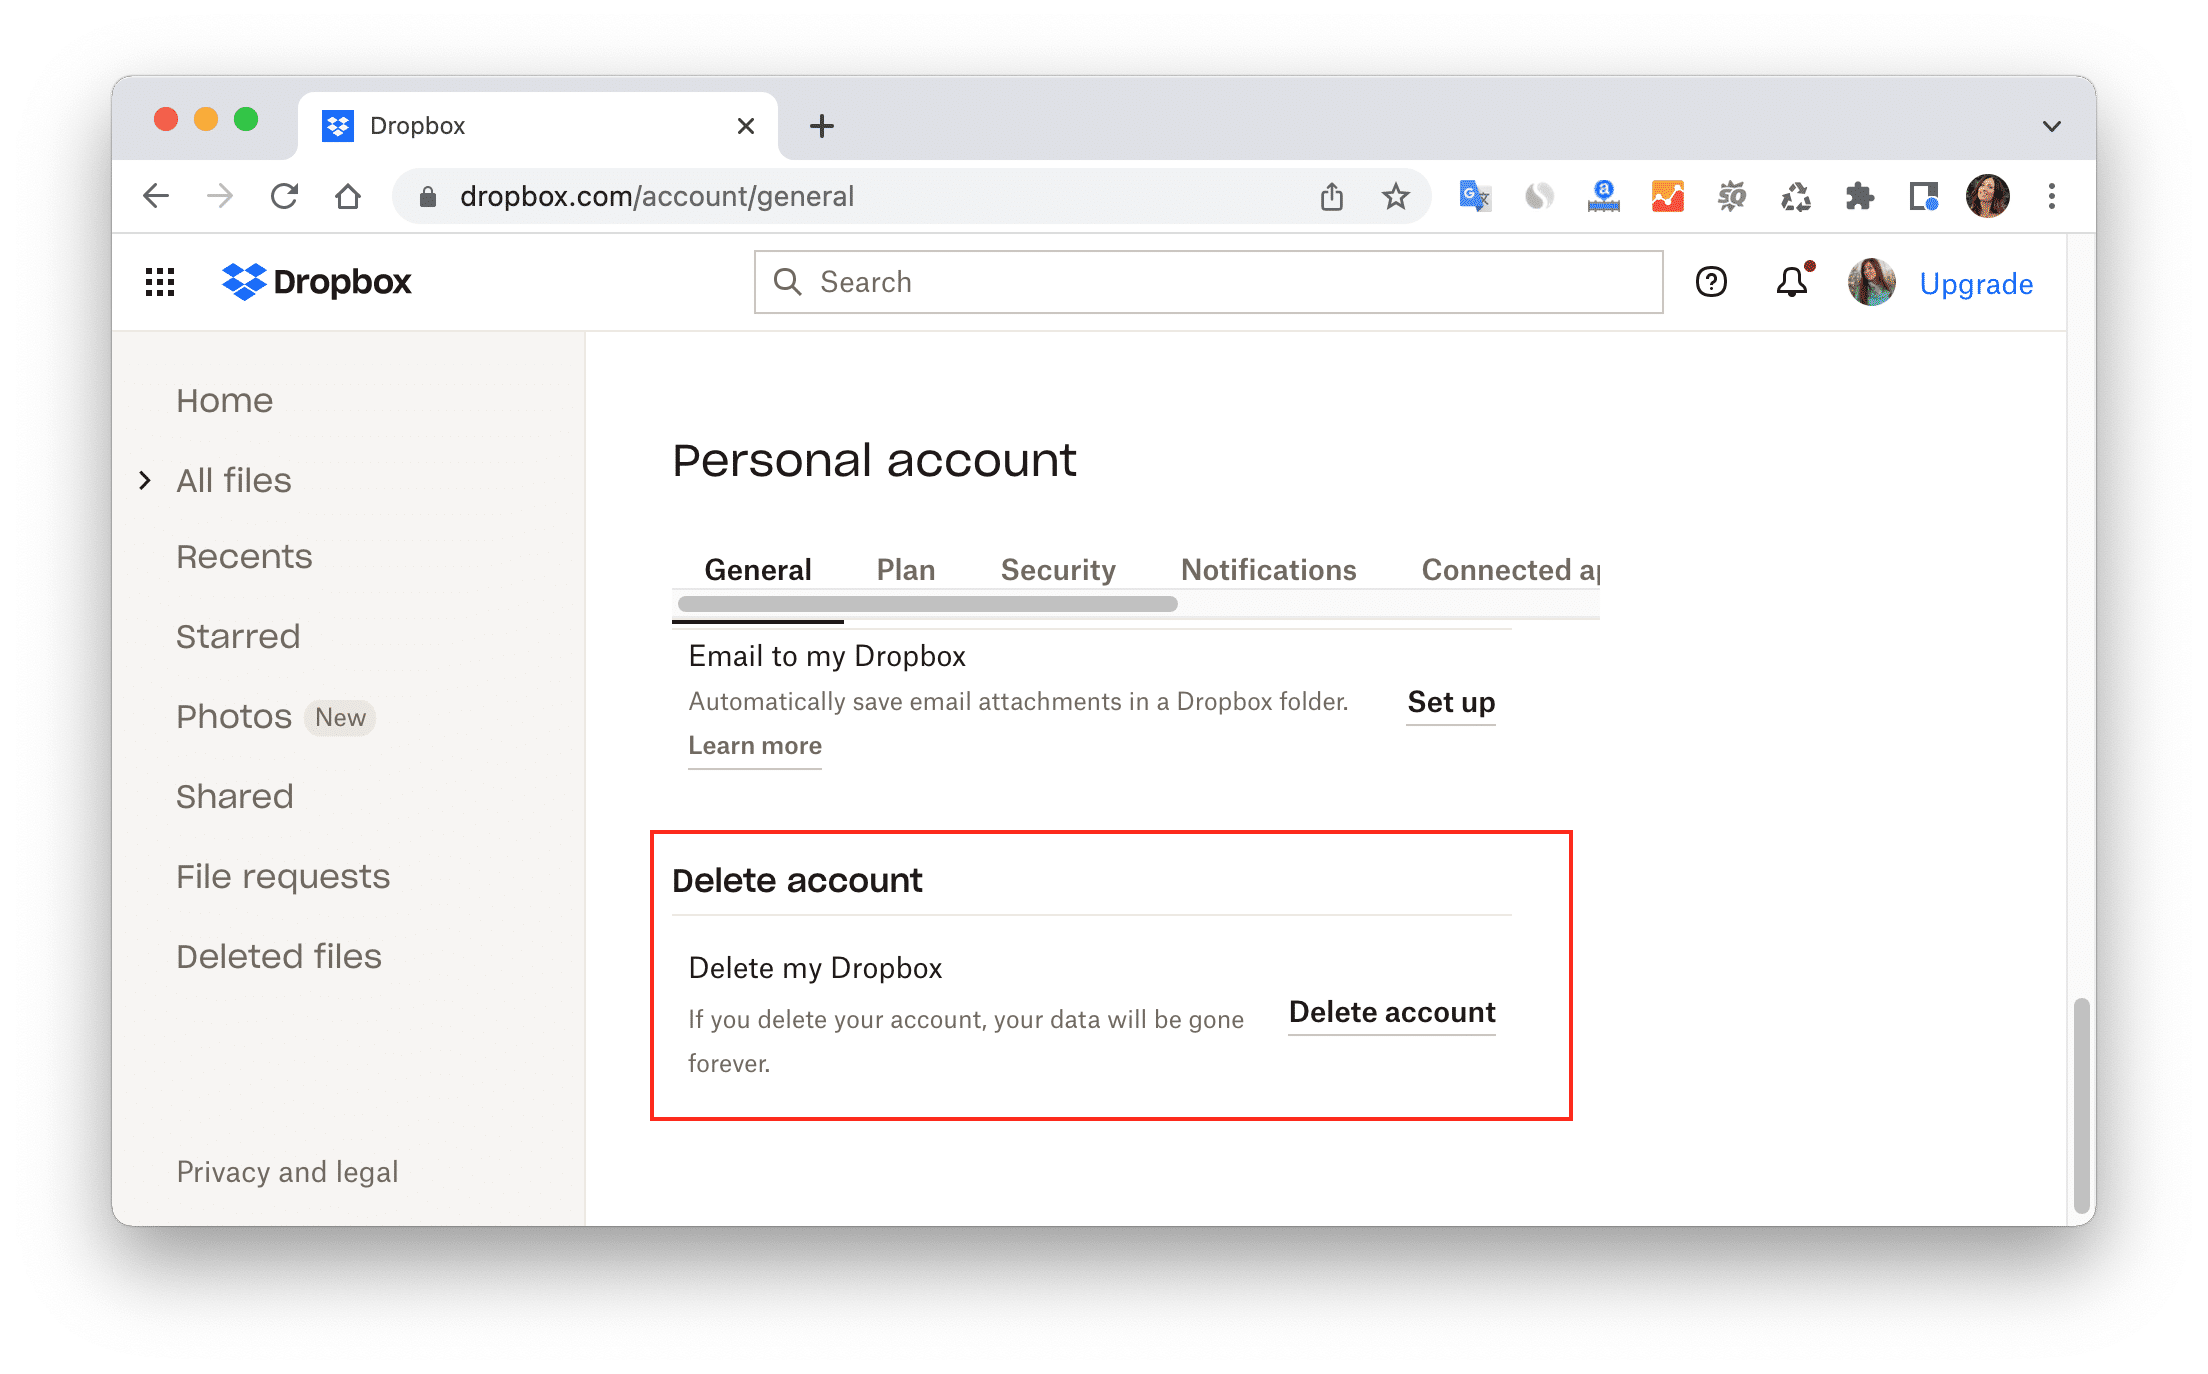 Dropbox settings page showing the Delete account section